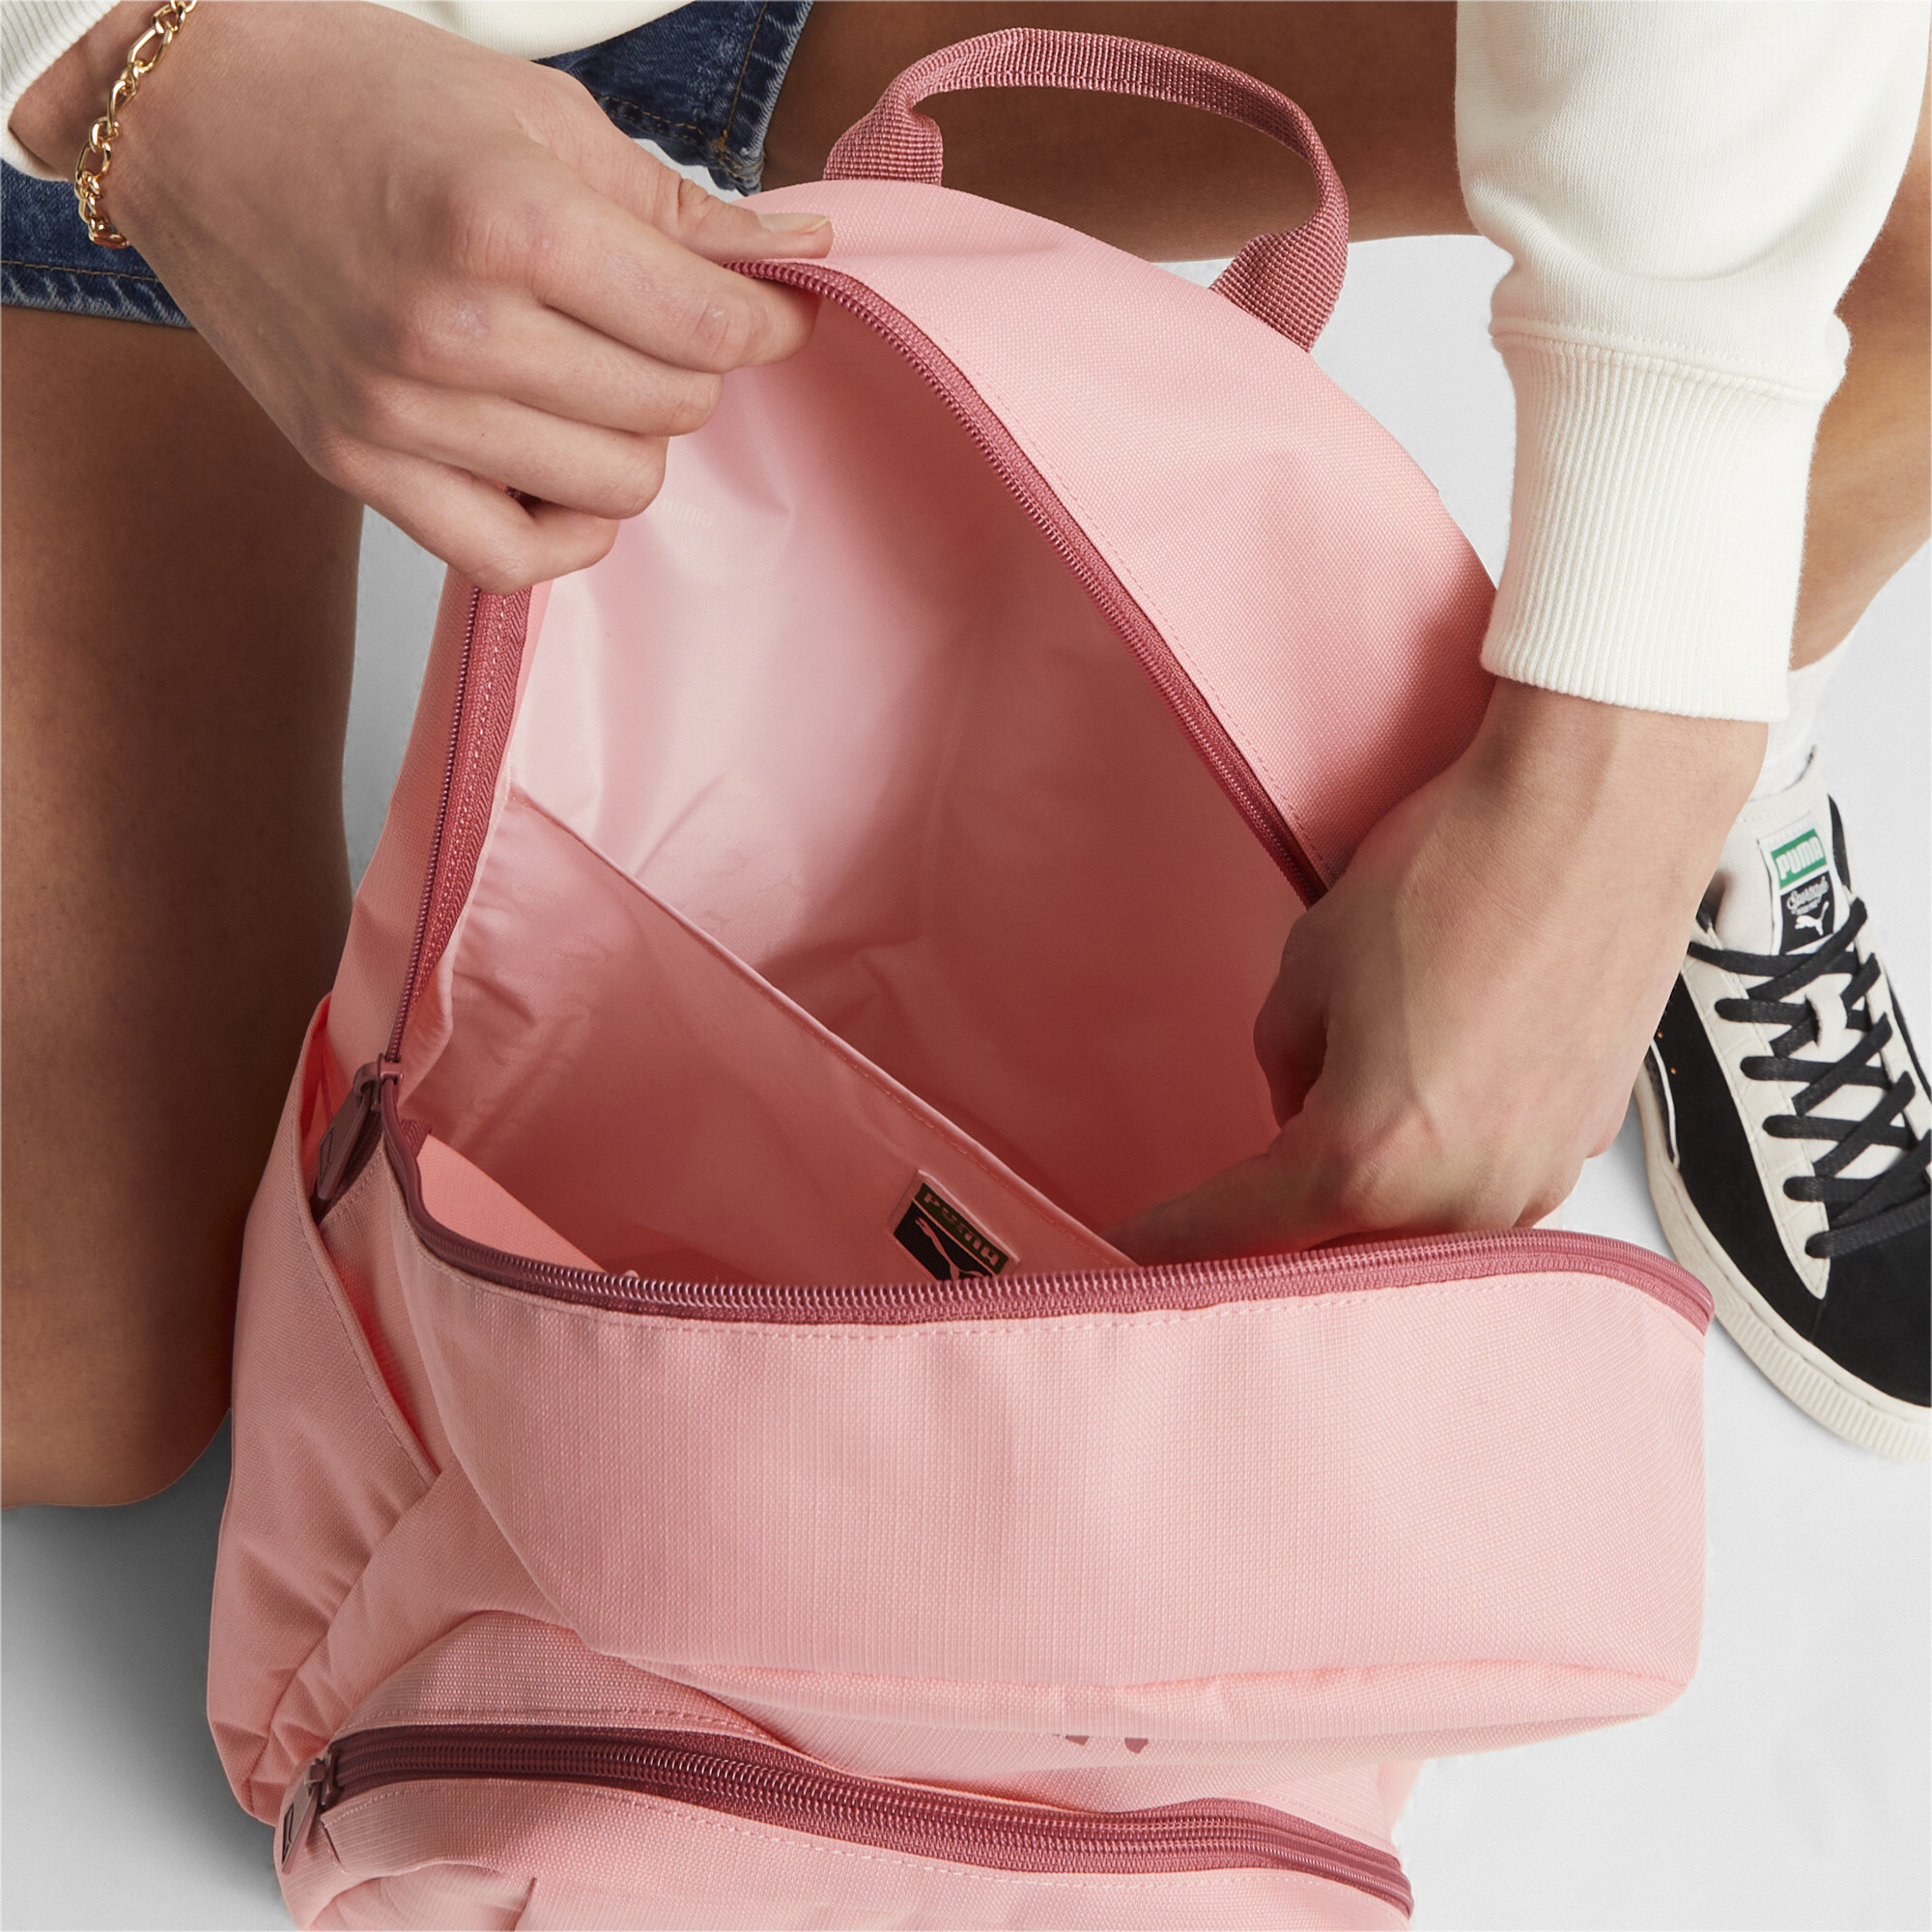 Men's PUMA Classics Archive Backpack In Pink